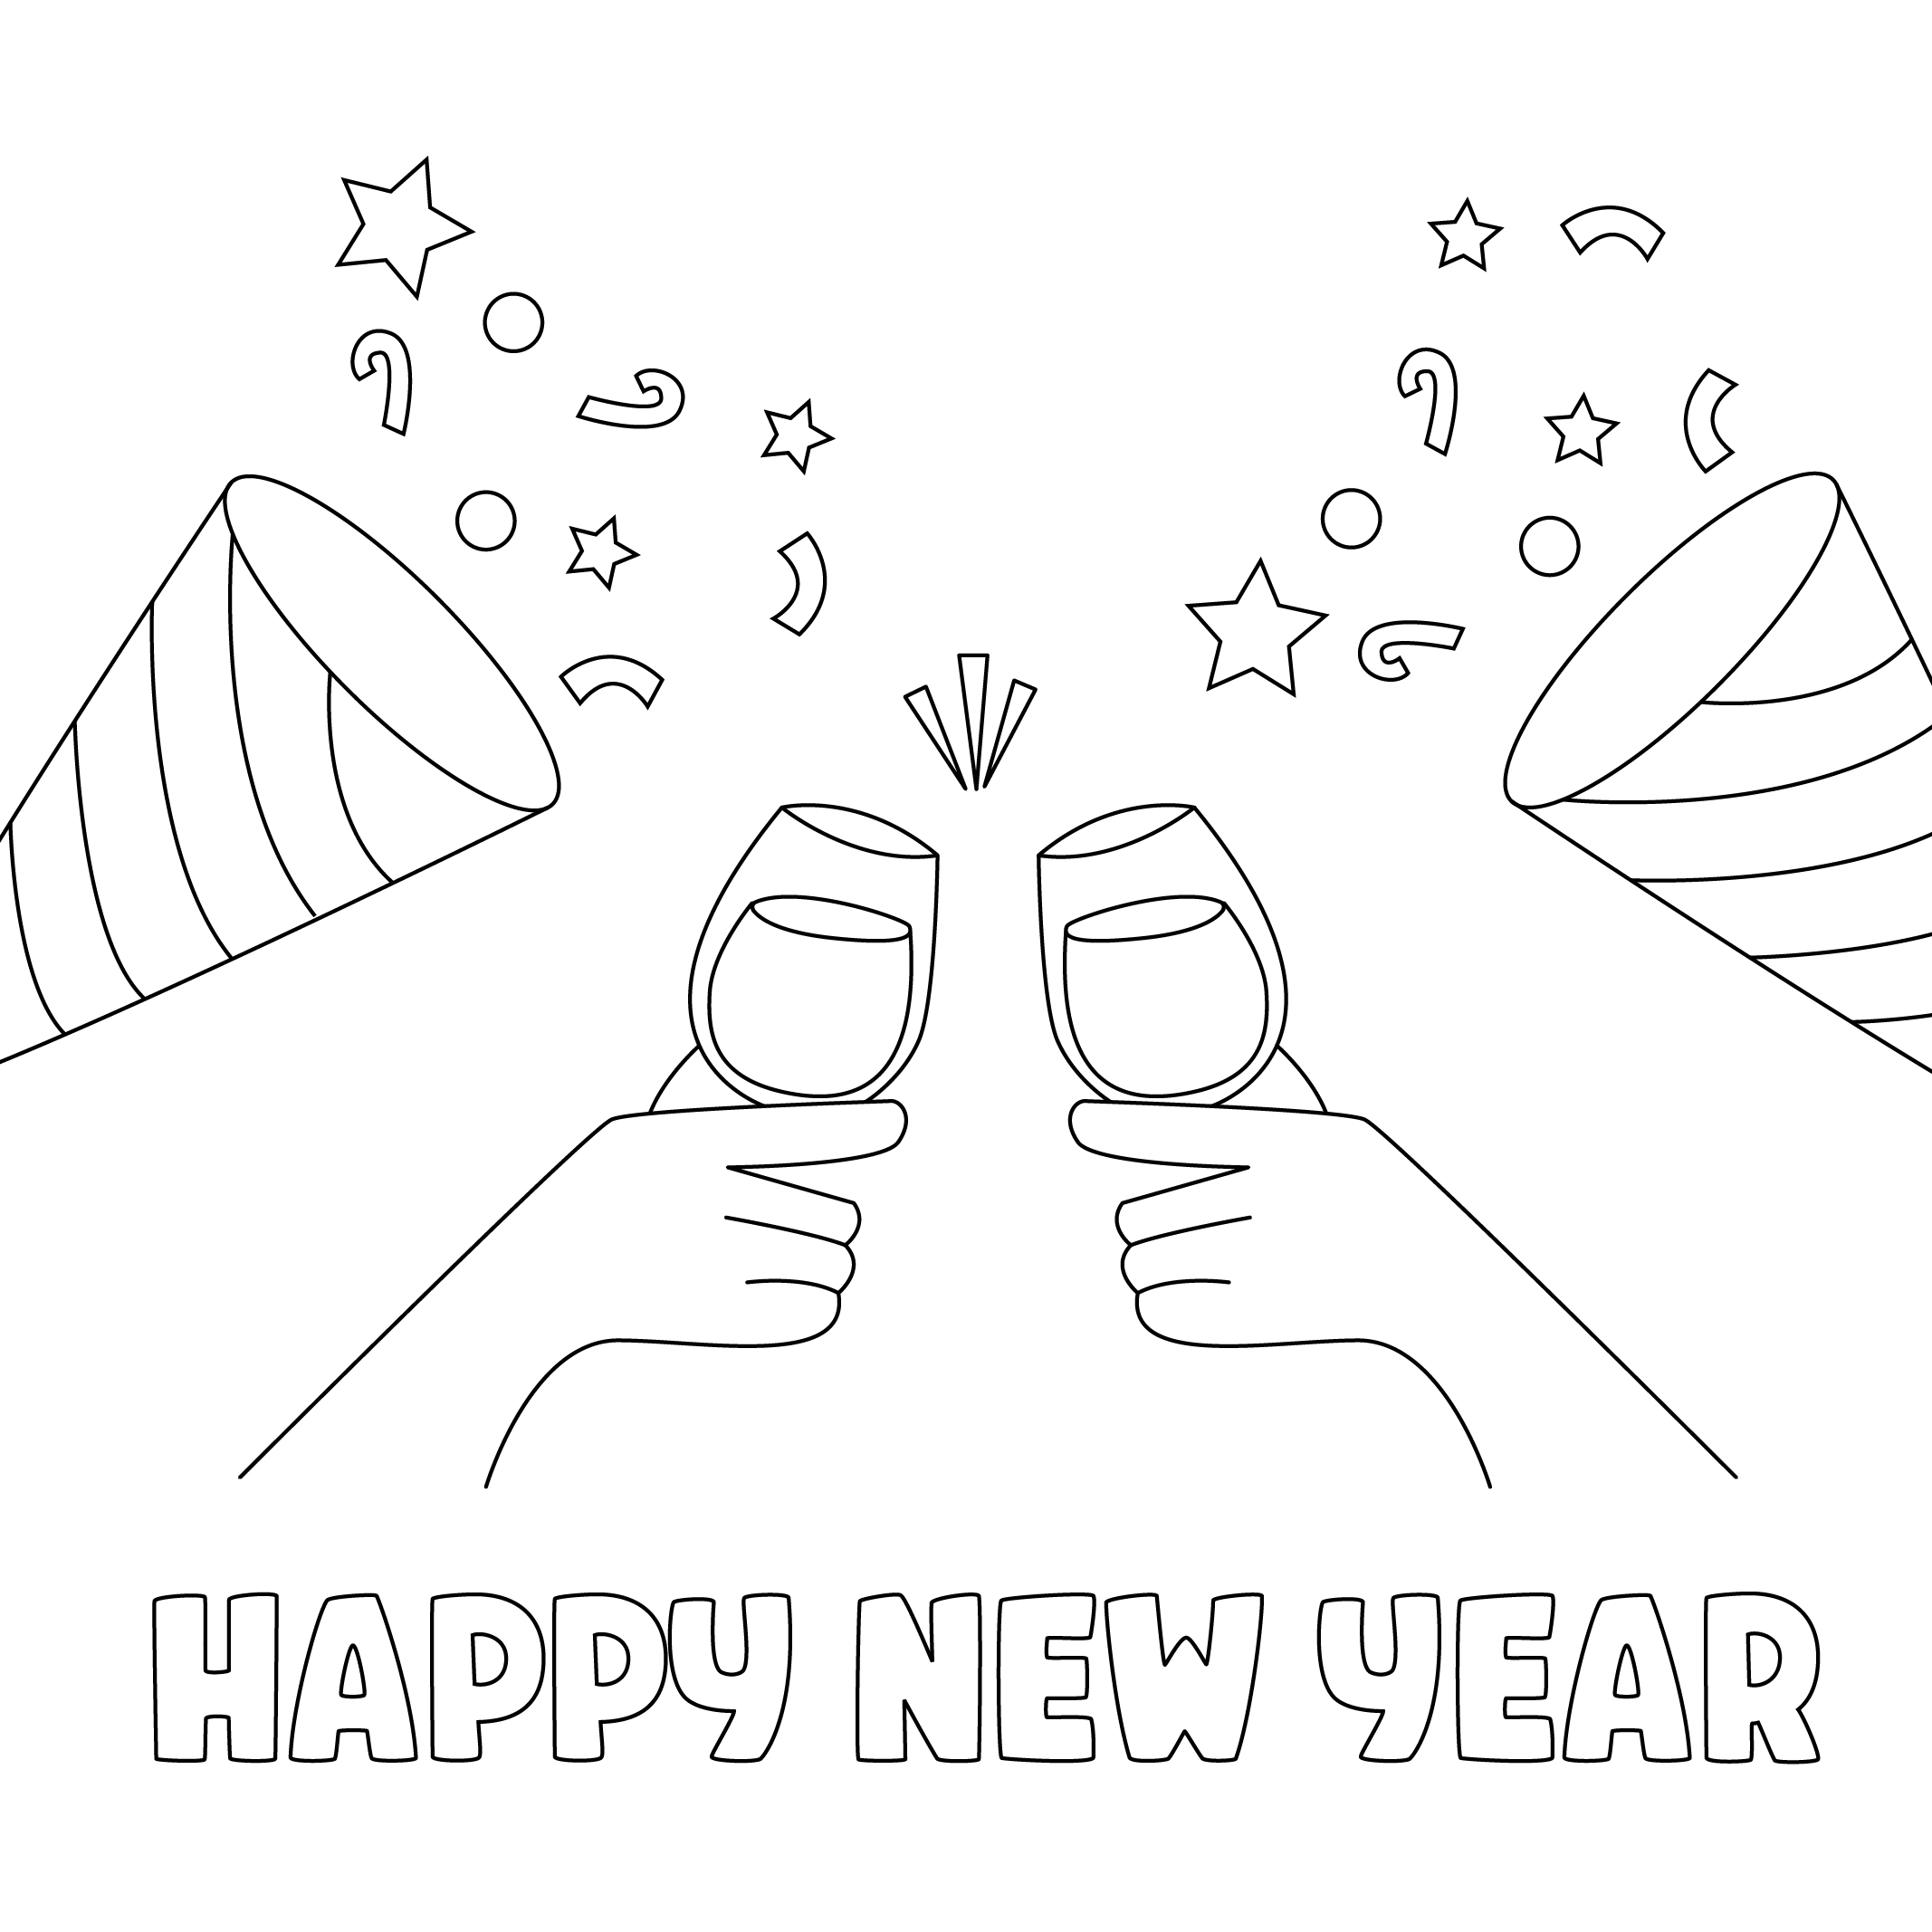 Free New Year's Eve Image Drawing Download in Illustrator, PSD, EPS